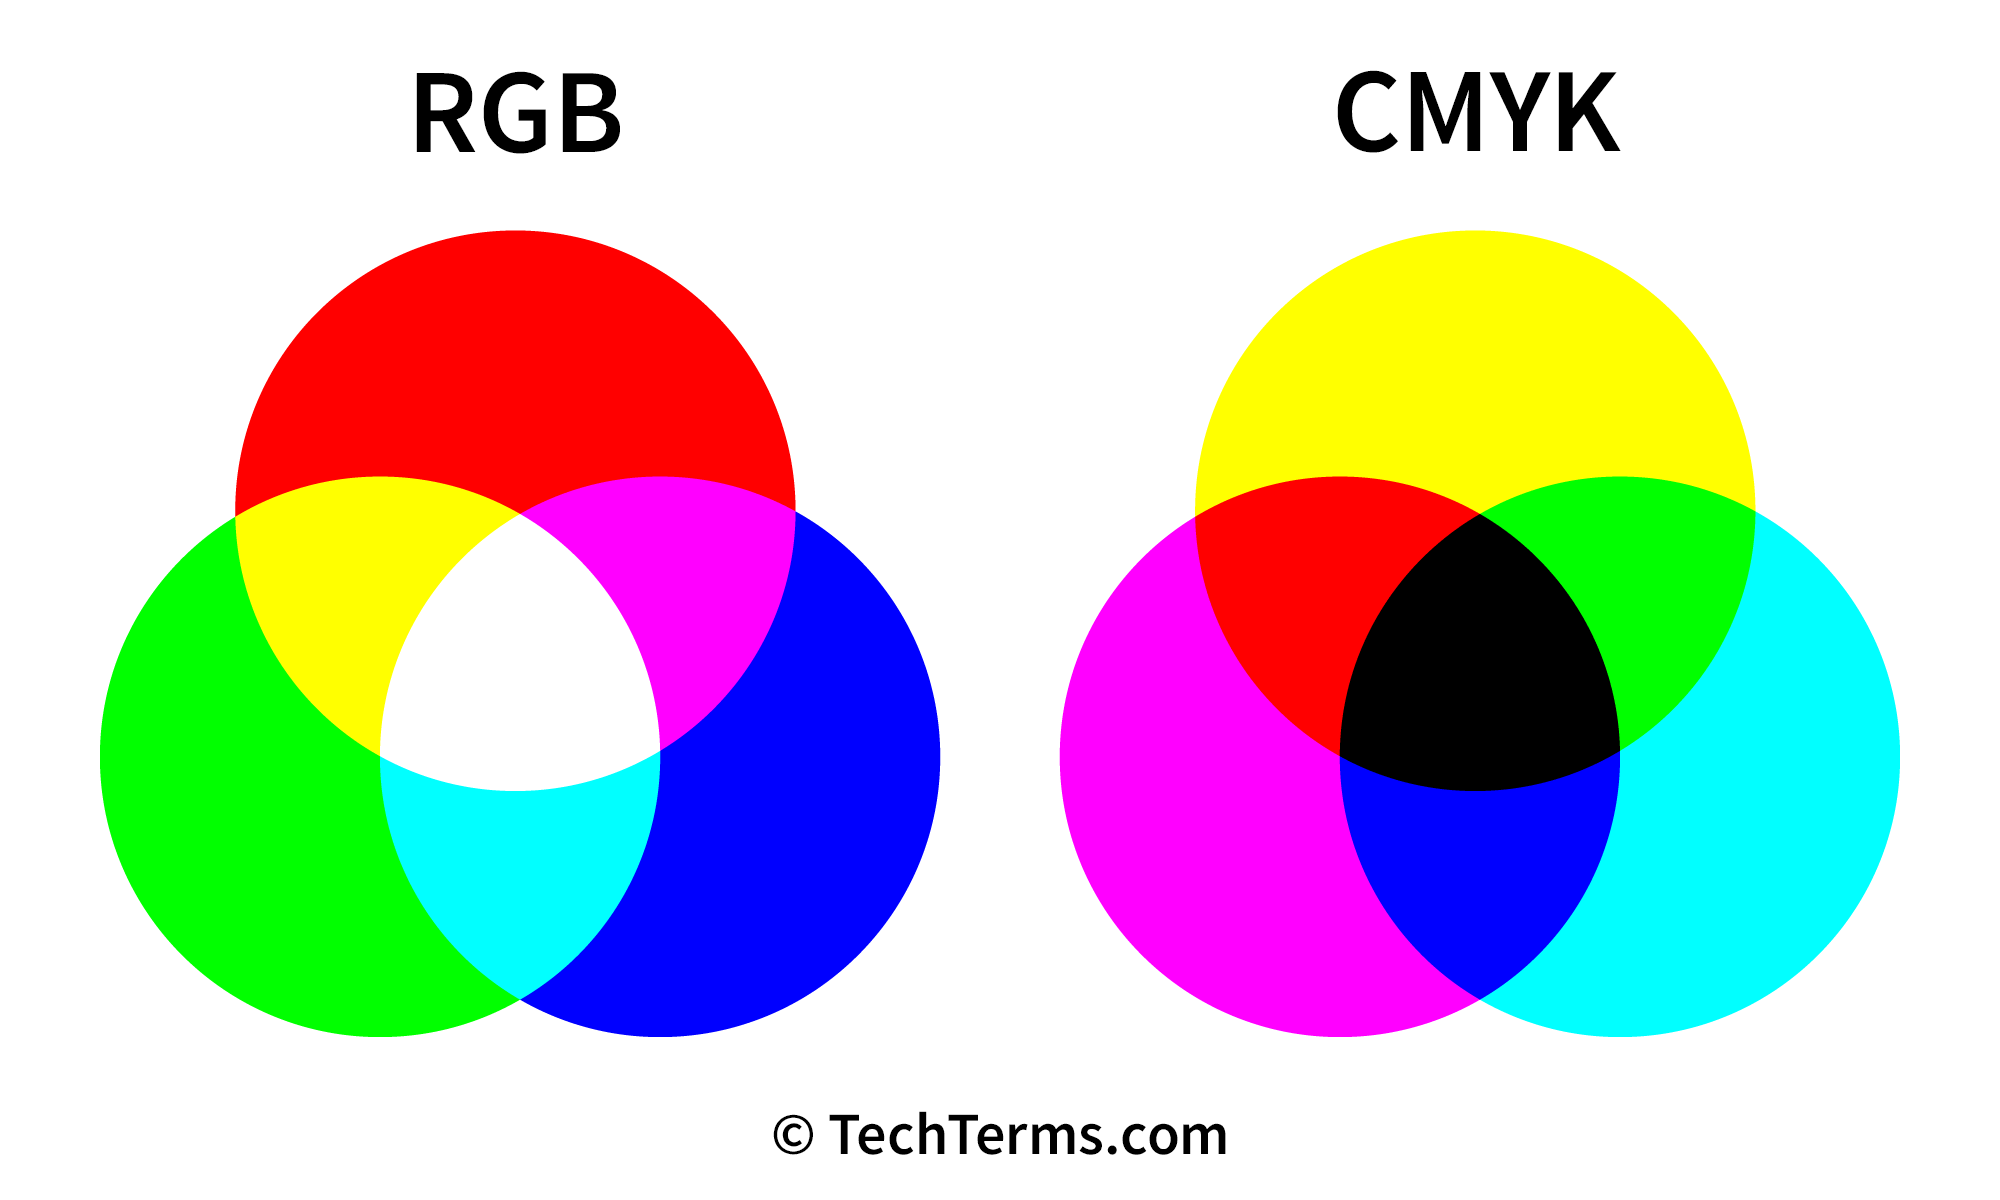 Does RGB mean all colors?